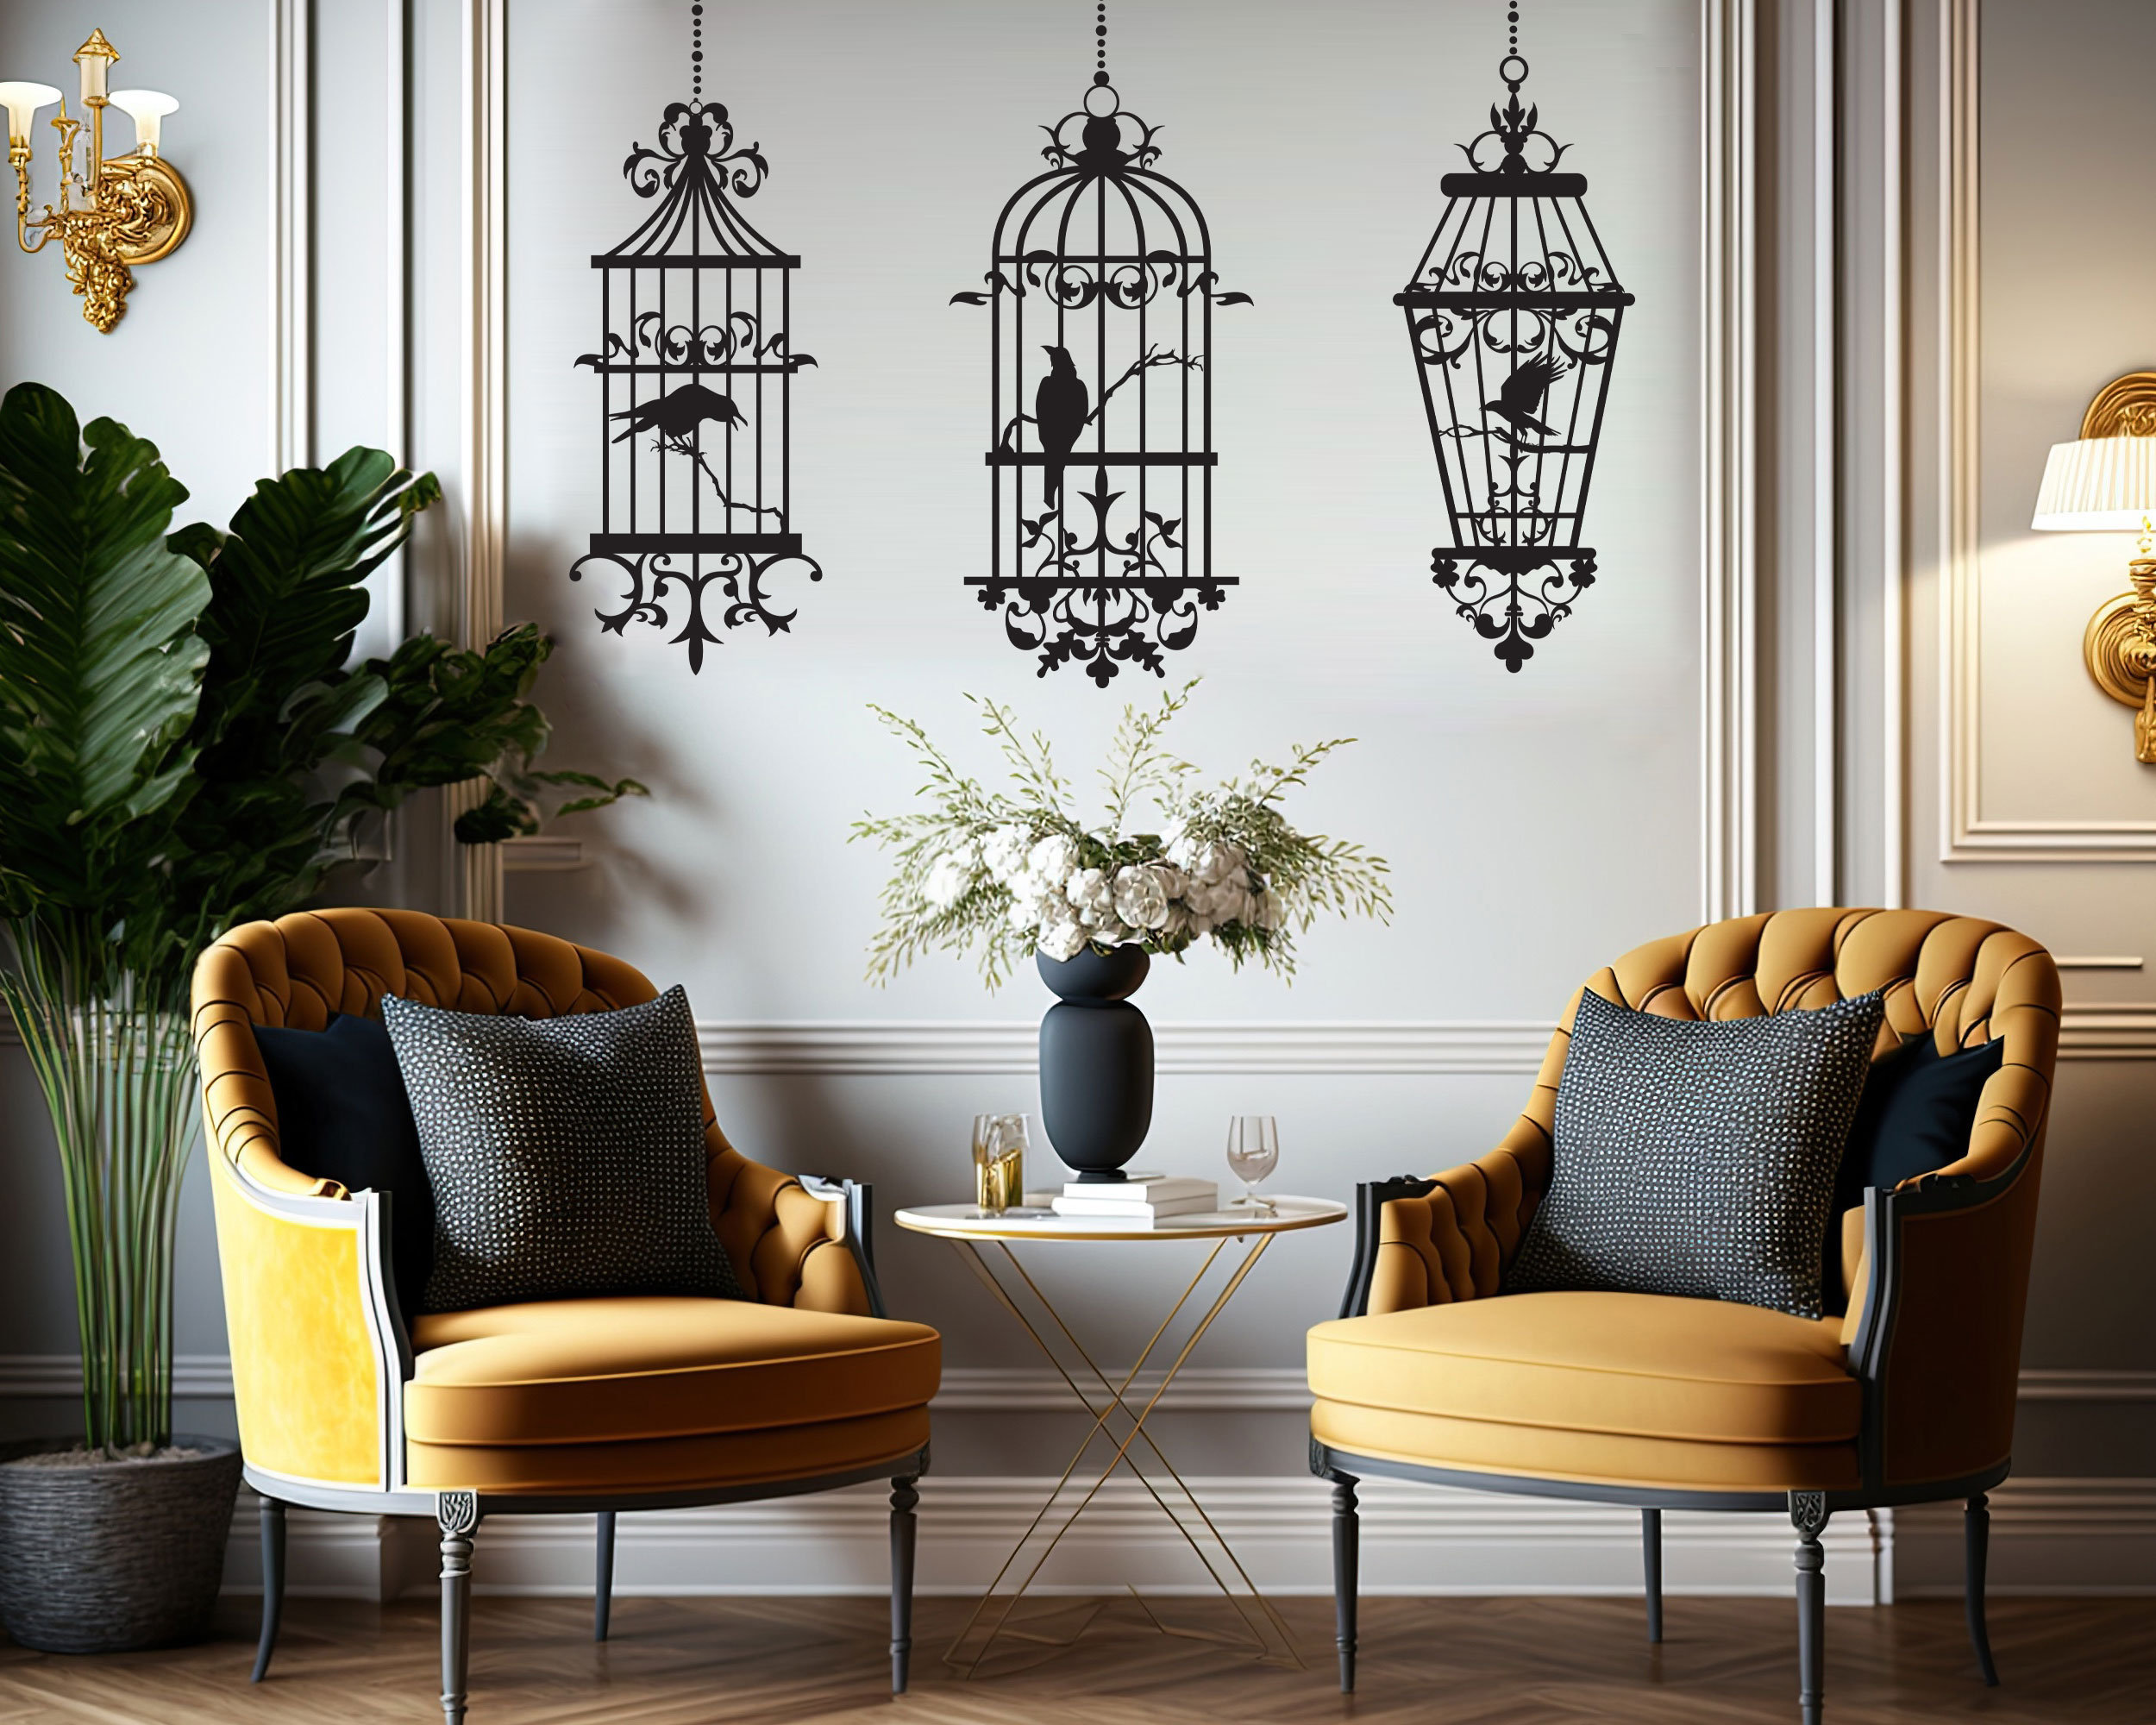 Gothic Home Decor Goth Wall Decals Vintage Style Birdcages pic